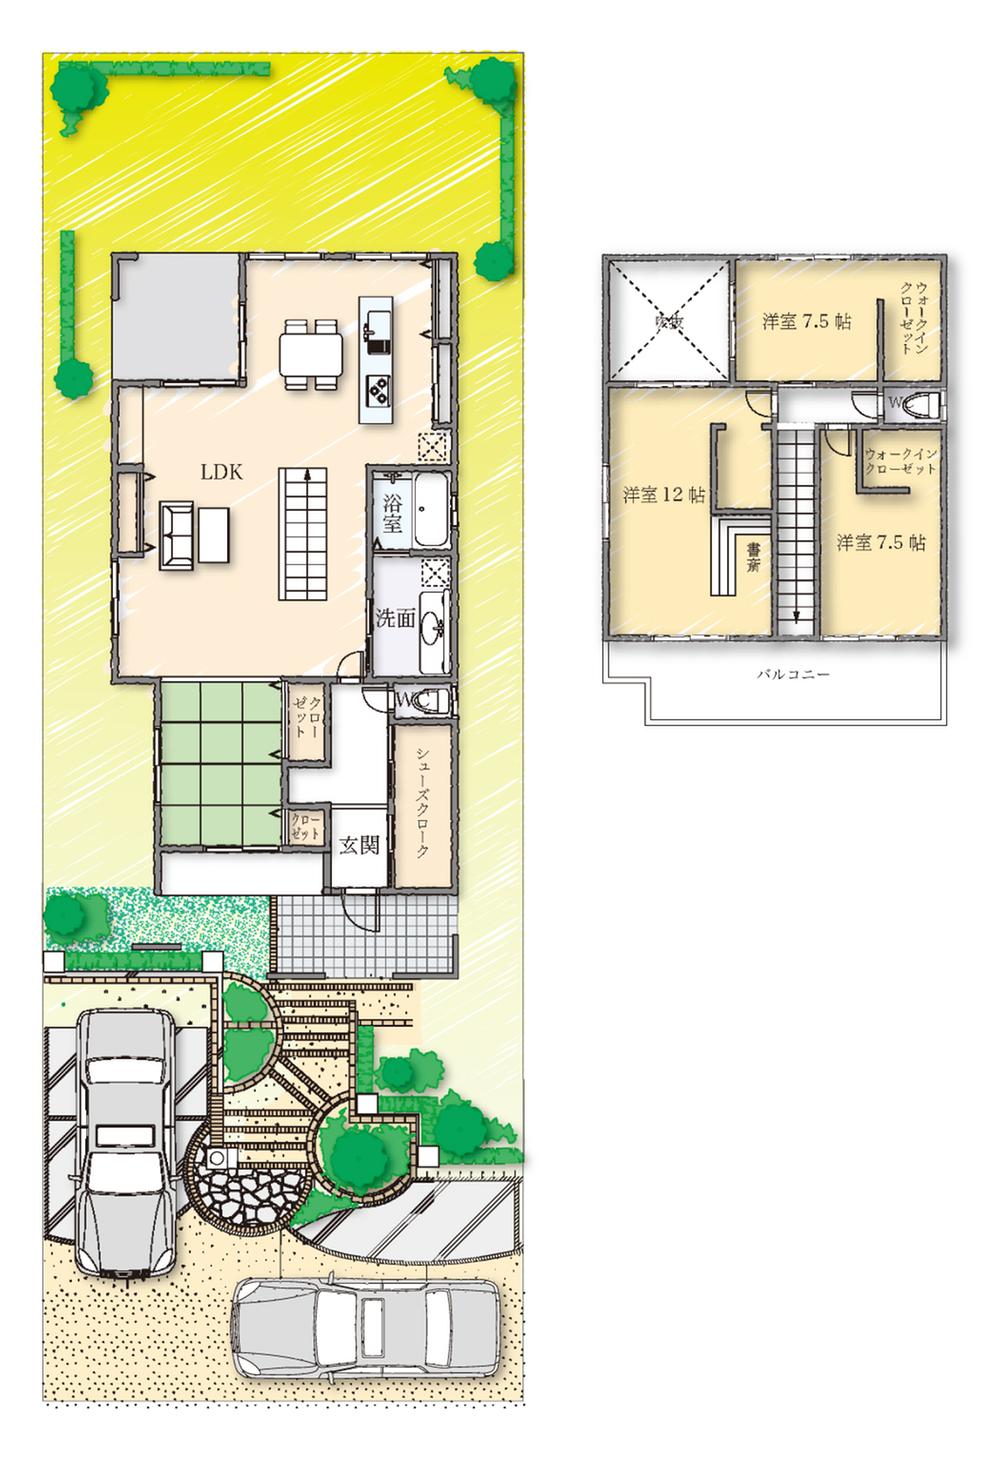 Other building plan example. Also you can also consult the plan such as the Company.  Building plan example (No. 1 place) building price 17.3 million yen, Building area 135 sq m